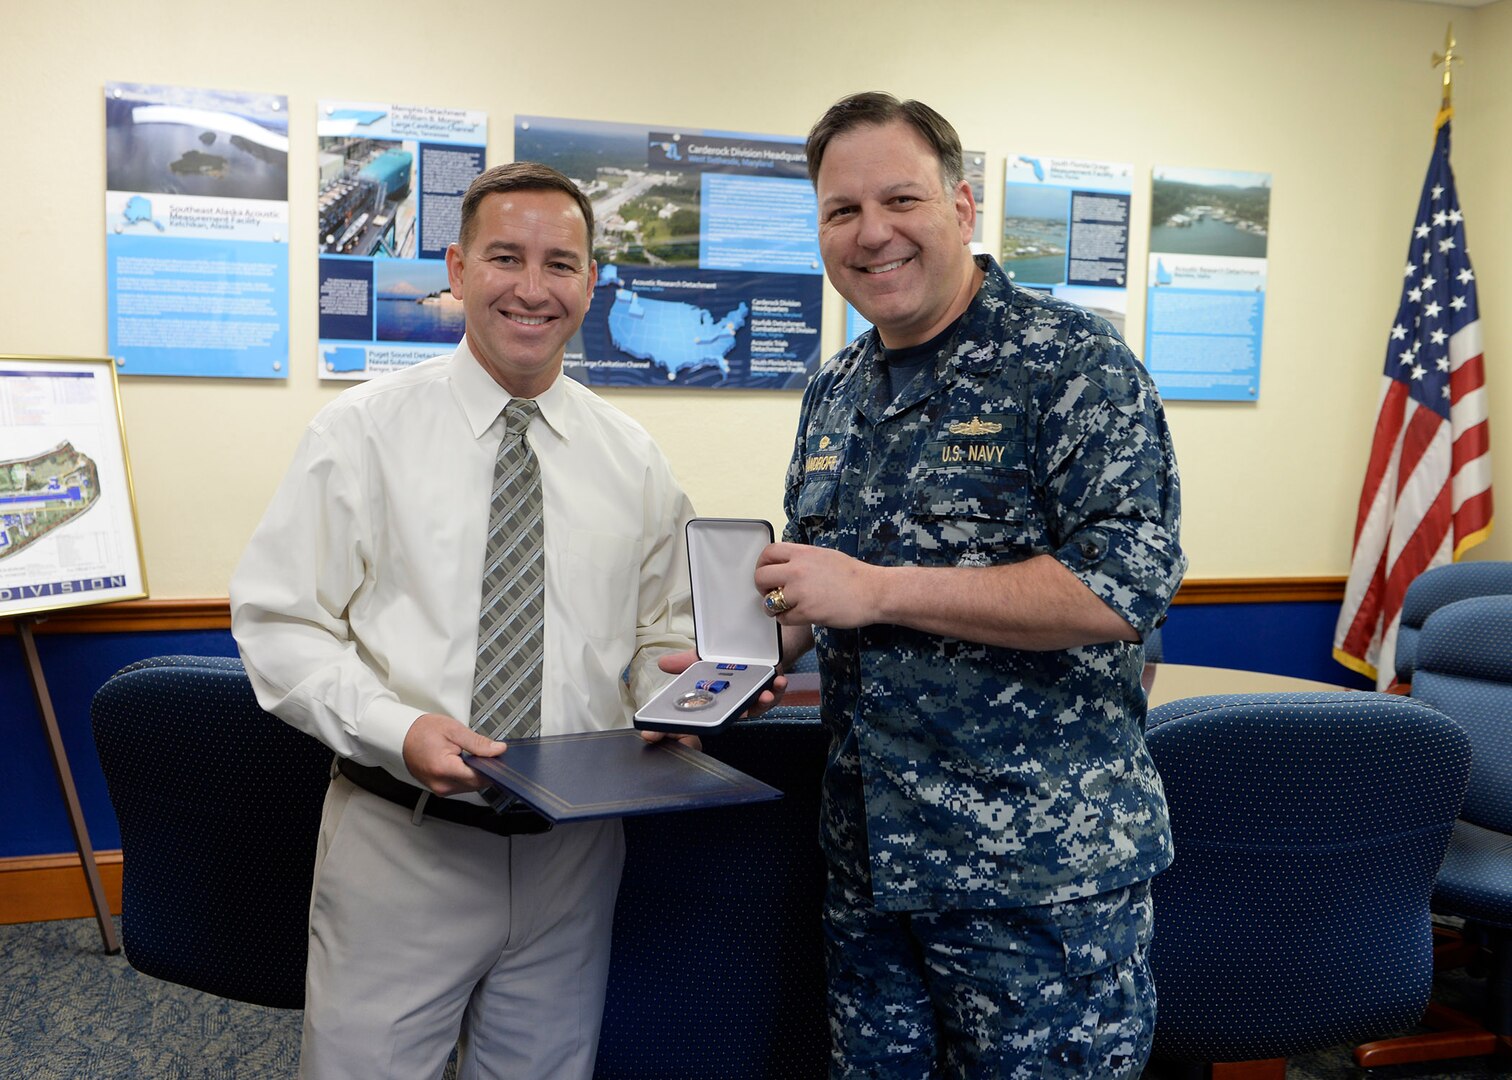 Brian Caine, TUBA Technical Program Manager, receives the Navy Meritorious Civilian Service Award on Nov. 7, 2018, from Naval Surface Warfare Center, Carderock Division Commanding Officer Capt. Mark Vandroff for his contributions in the area of acoustics systems for undersea warfare. (U.S. Navy photo by Devin Pisner/Released)